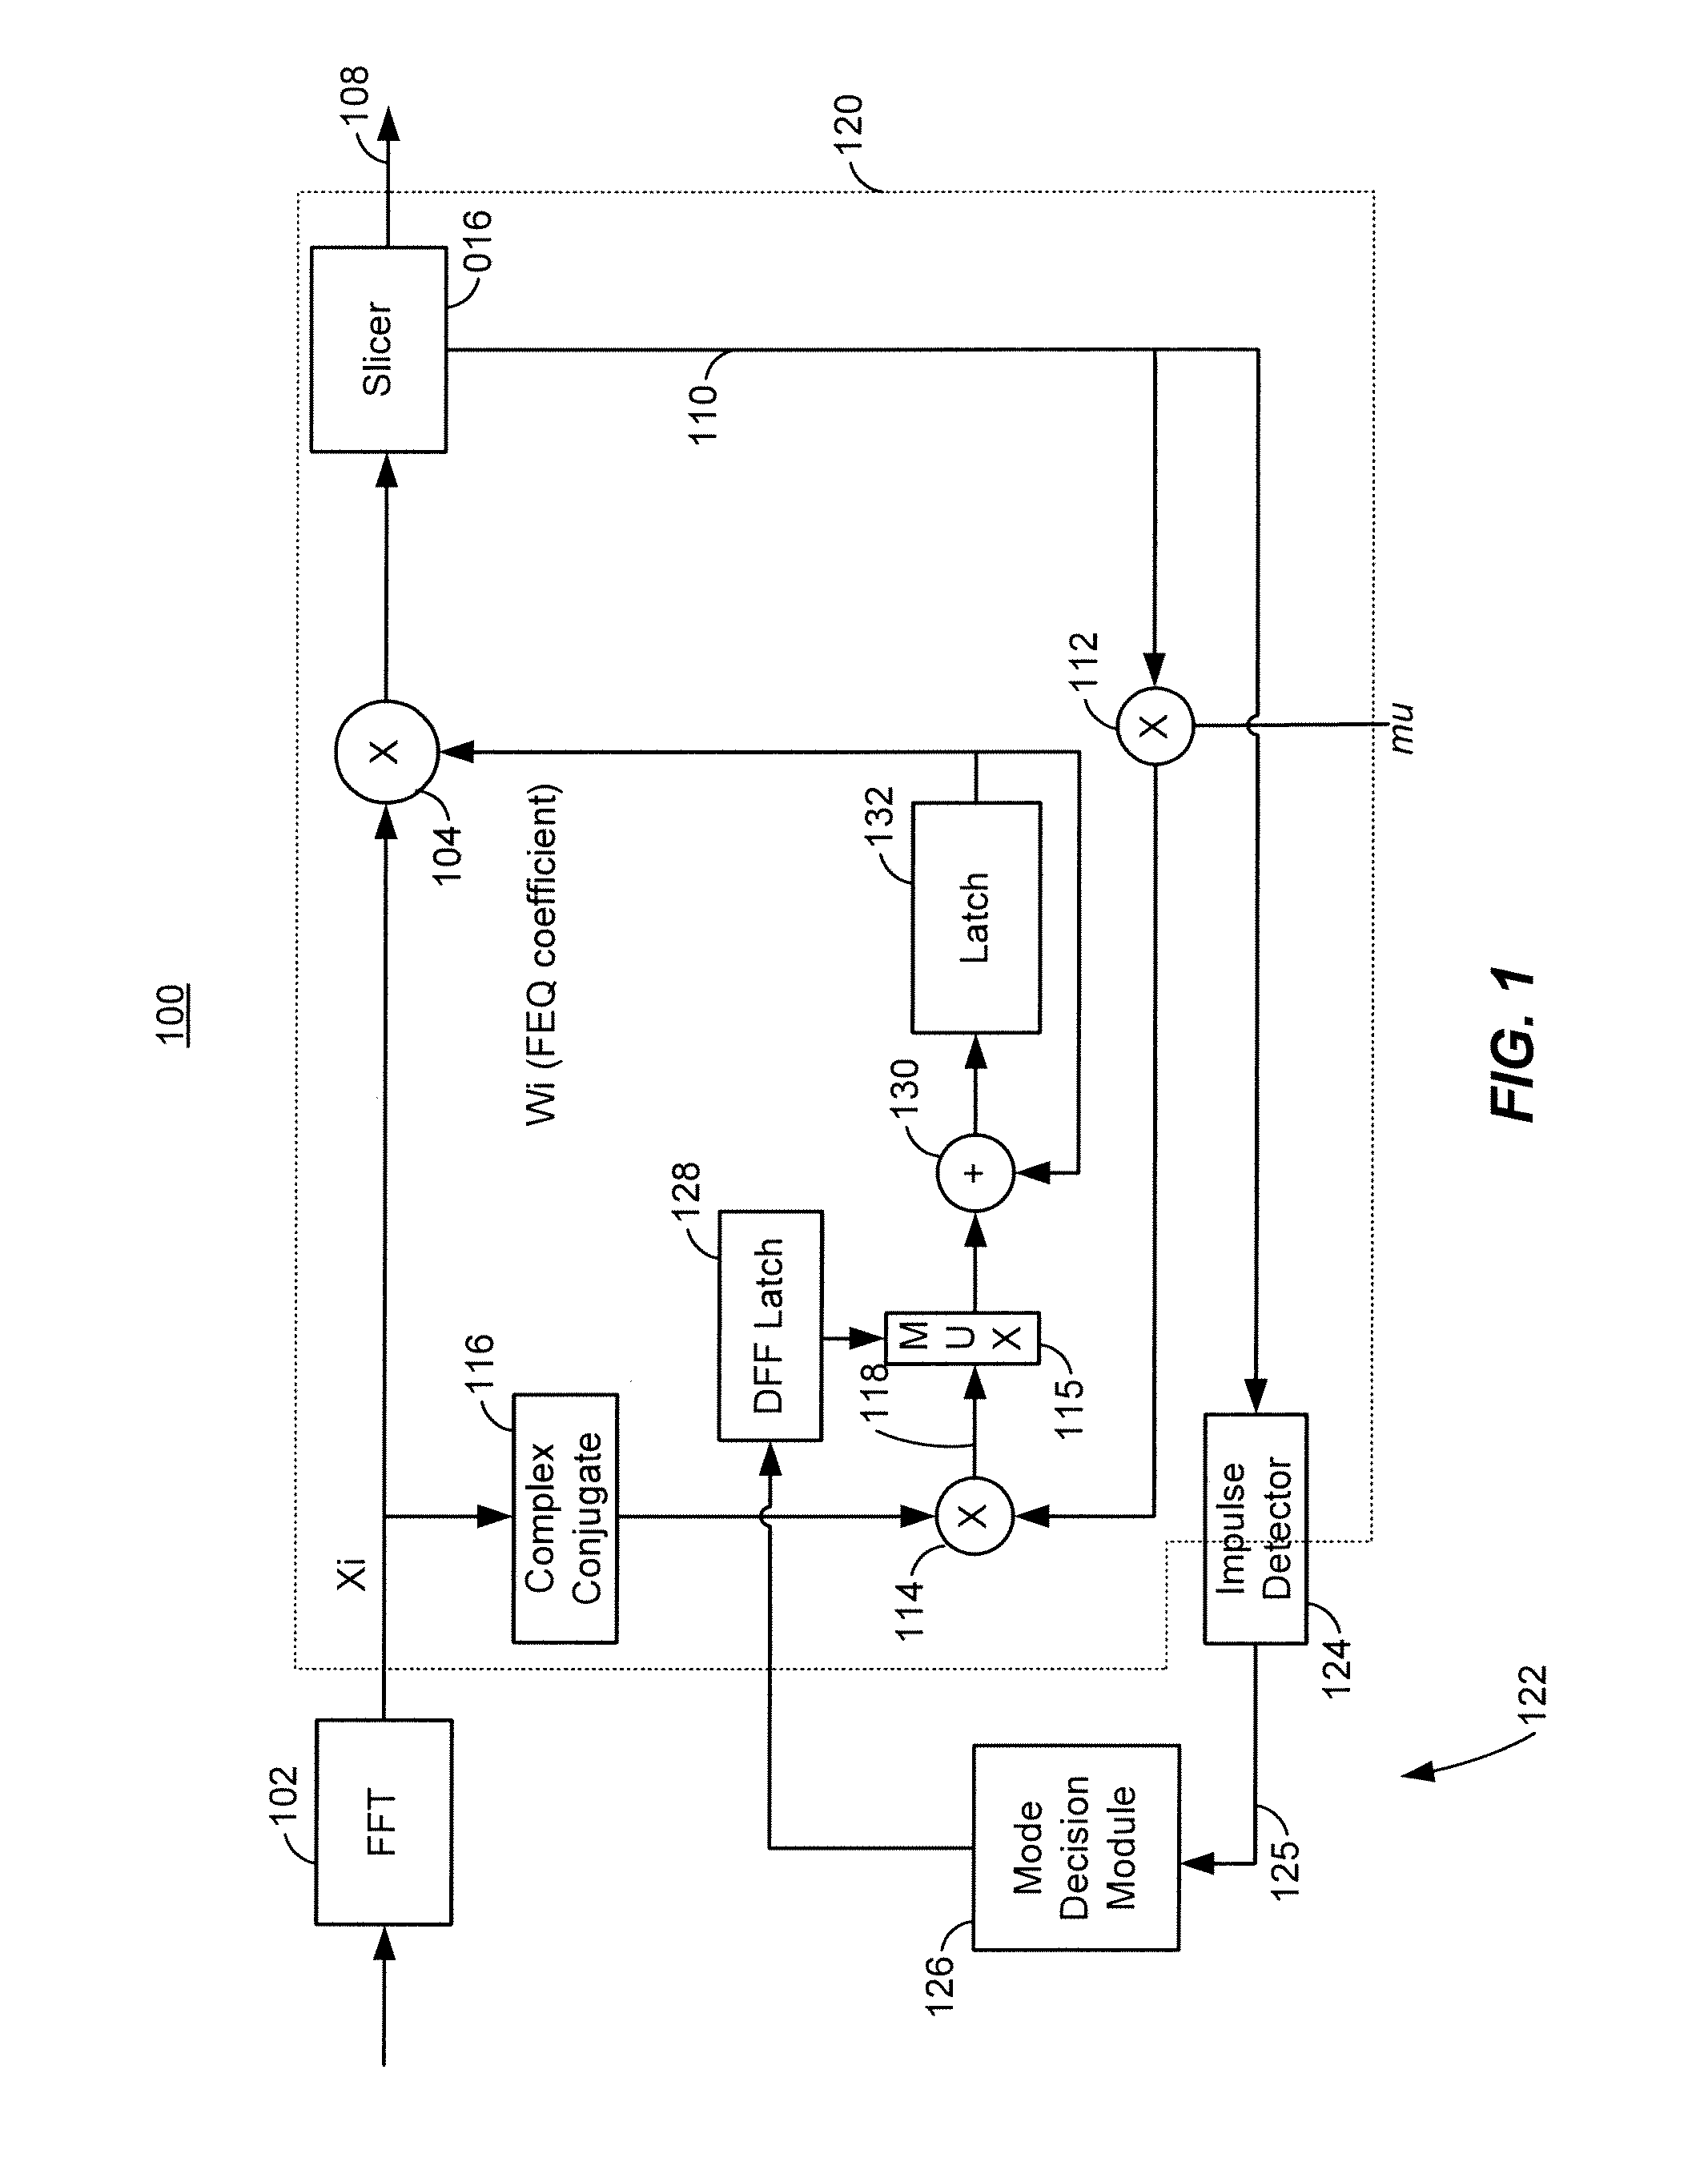 Wide band noise early detection and protection architecture for a frequency domain equalizer